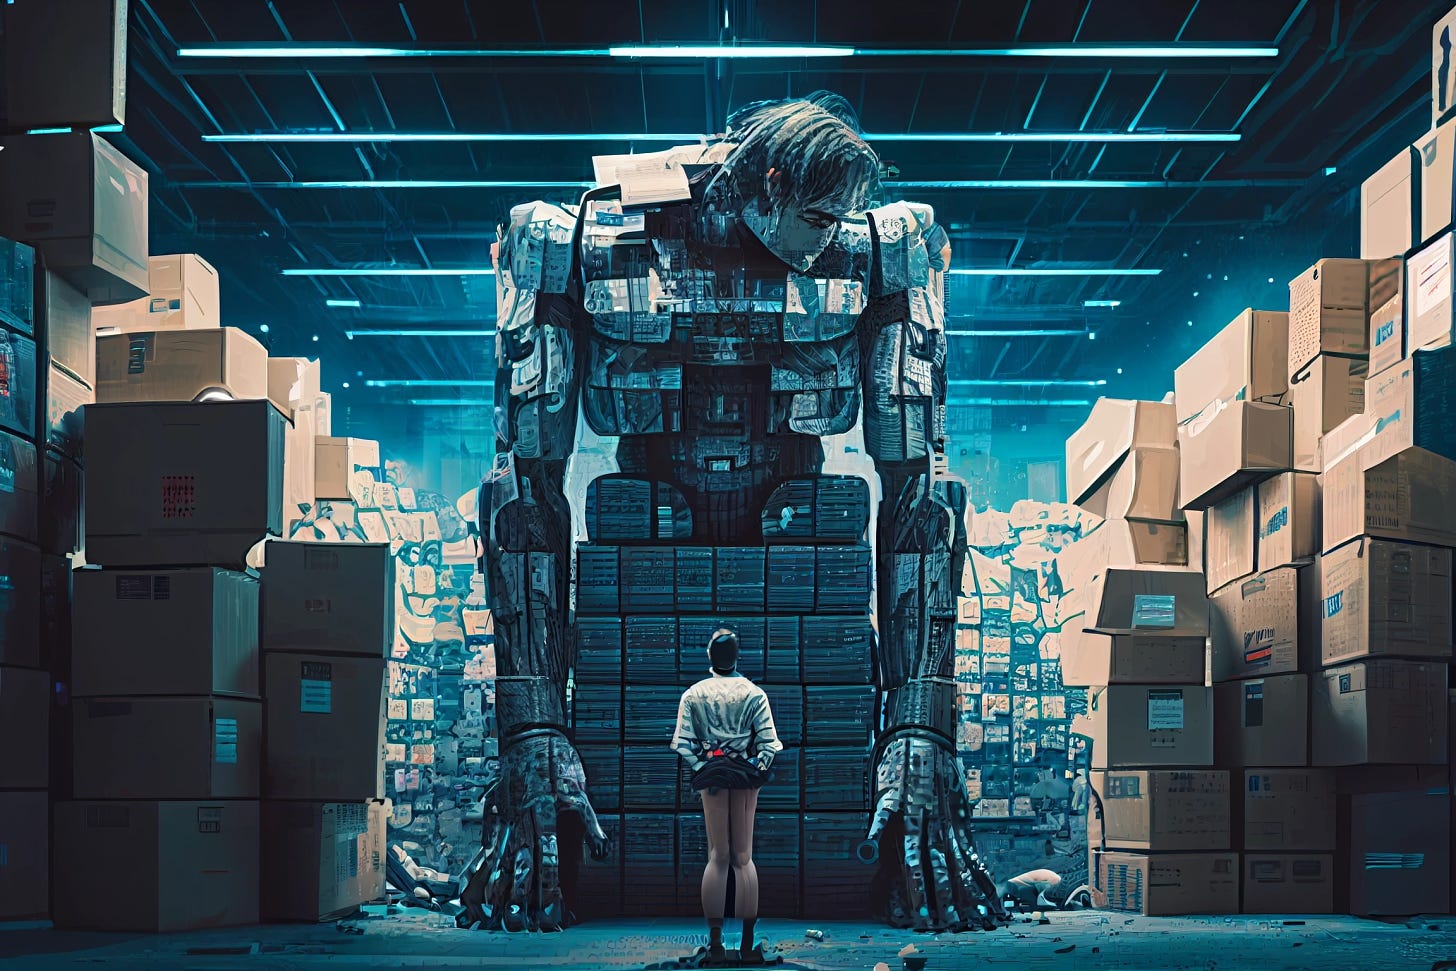 Midjourney-generated image of a woman in a massive warehouse filled with countless boxes, with a large AI robot in the middle overlooking it.